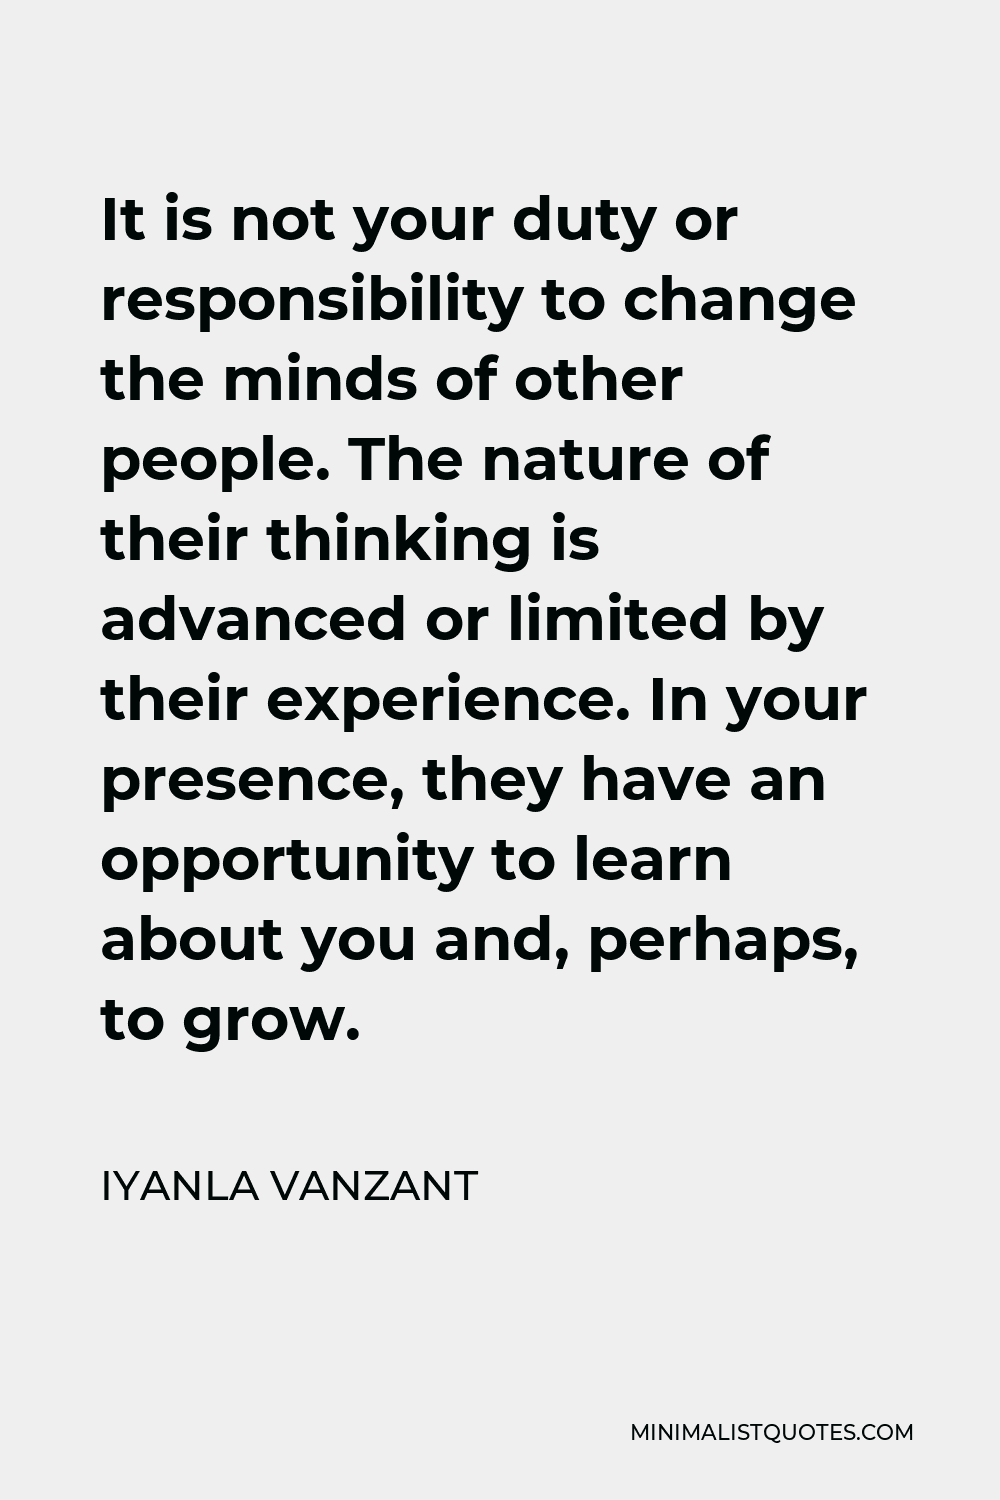 Iyanla Vanzant Quote - It is not your duty or responsibility to change the minds of other people. The nature of their thinking is advanced or limited by their experience. In your presence, they have an opportunity to learn about you and, perhaps, to grow.